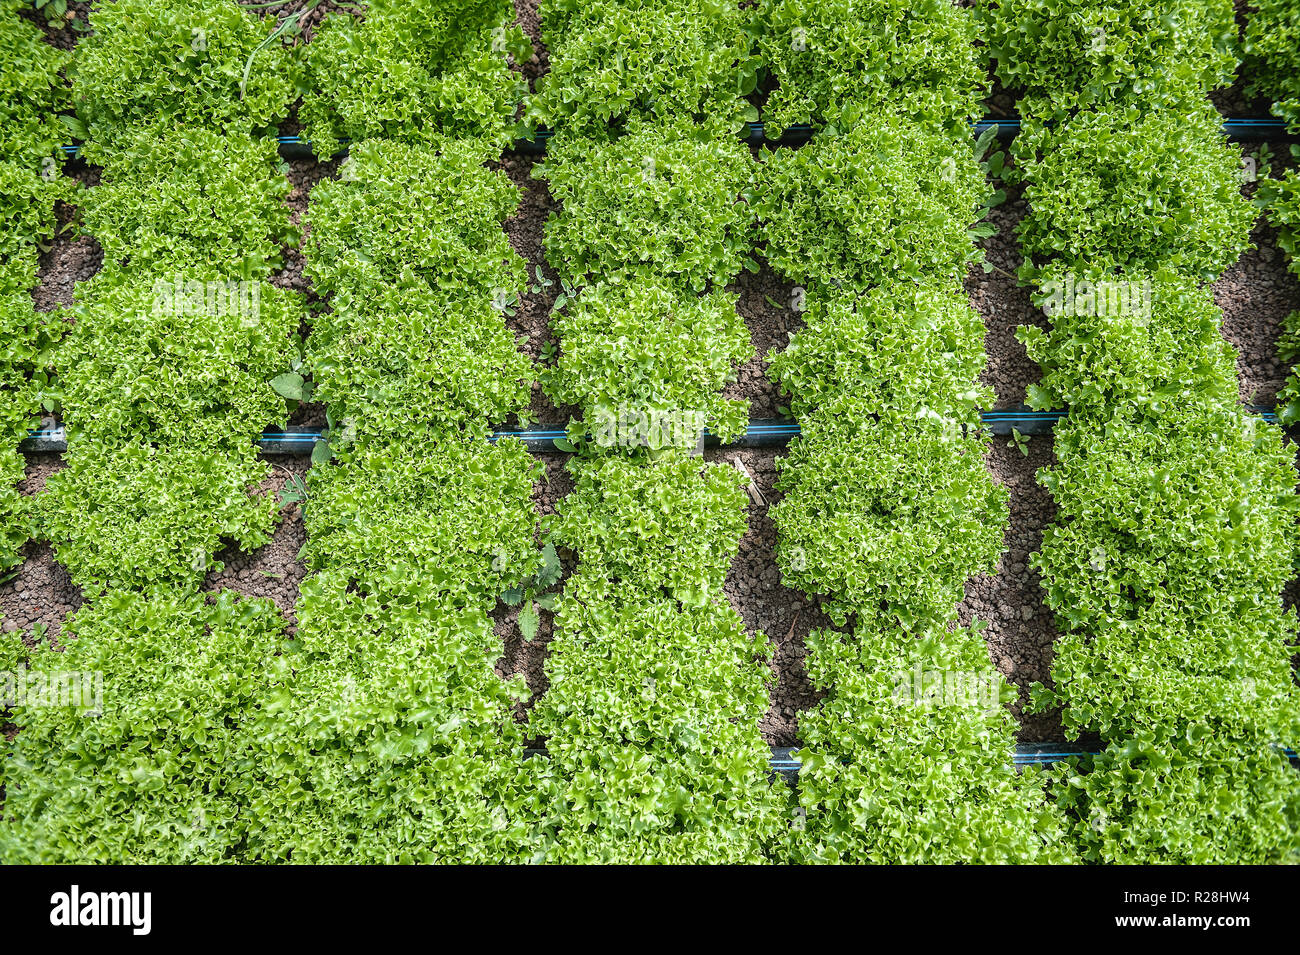 Rows of lettuce heads create green clusters of plantings in the garden. Stock Photo